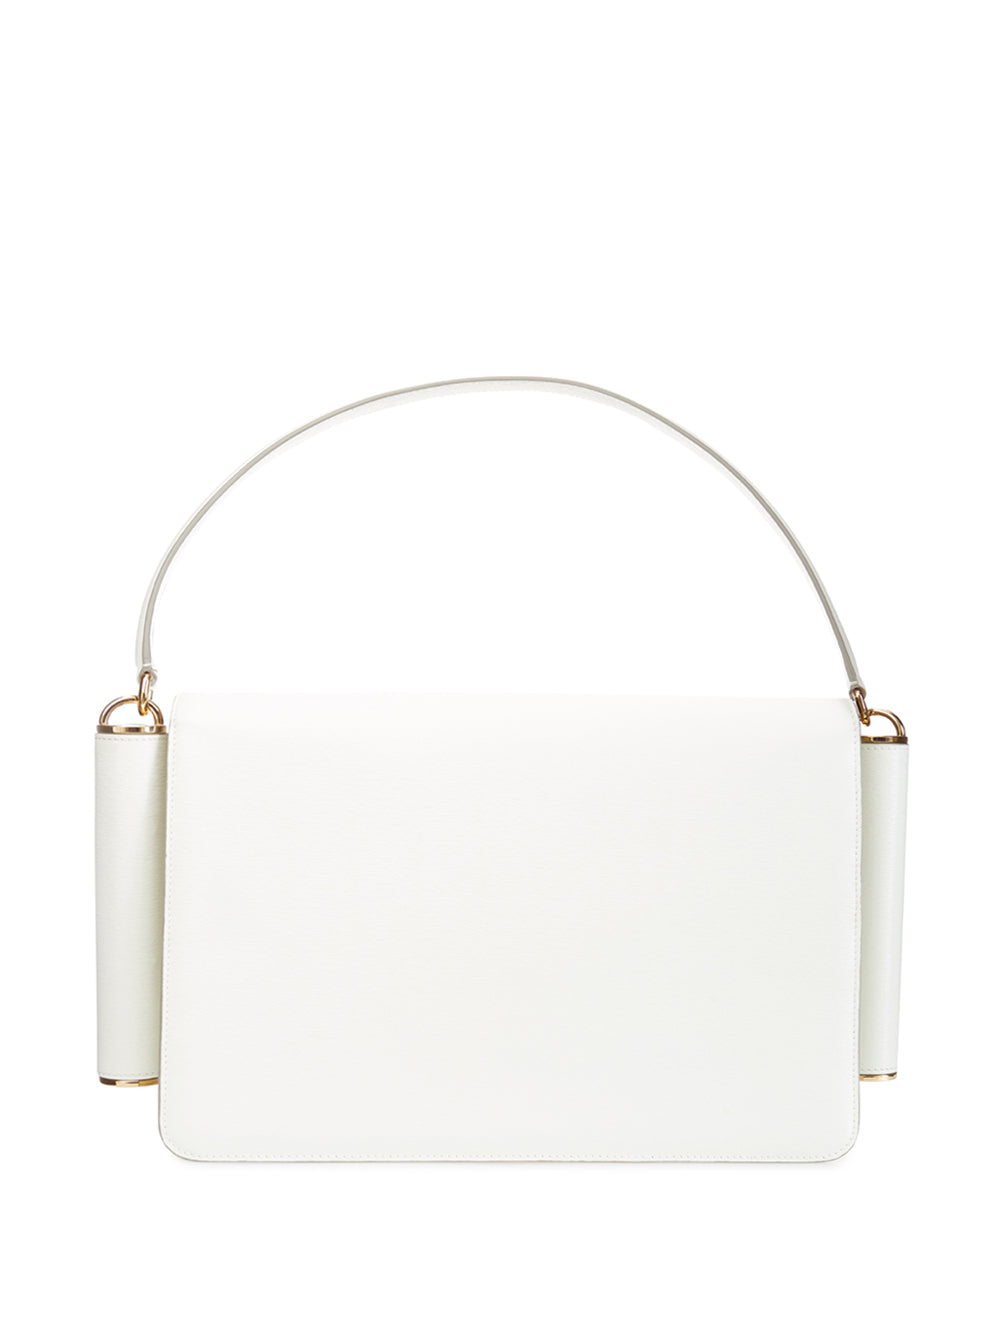 Dolce & Gabbana White Leather Shoulder Bag with Maxi Logo